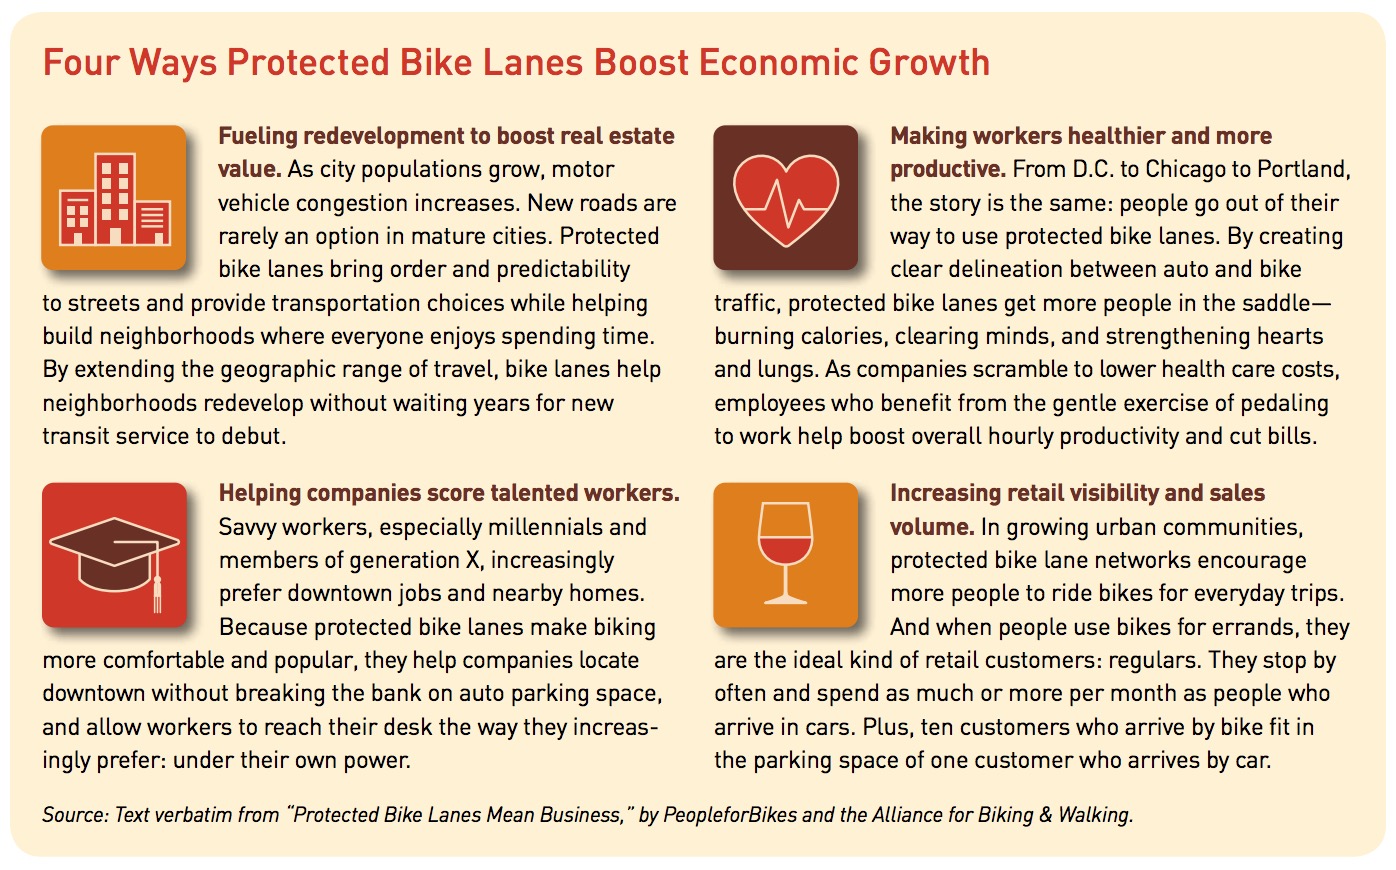 Four Ways Protected Bike Lanes Boost Economic Growth